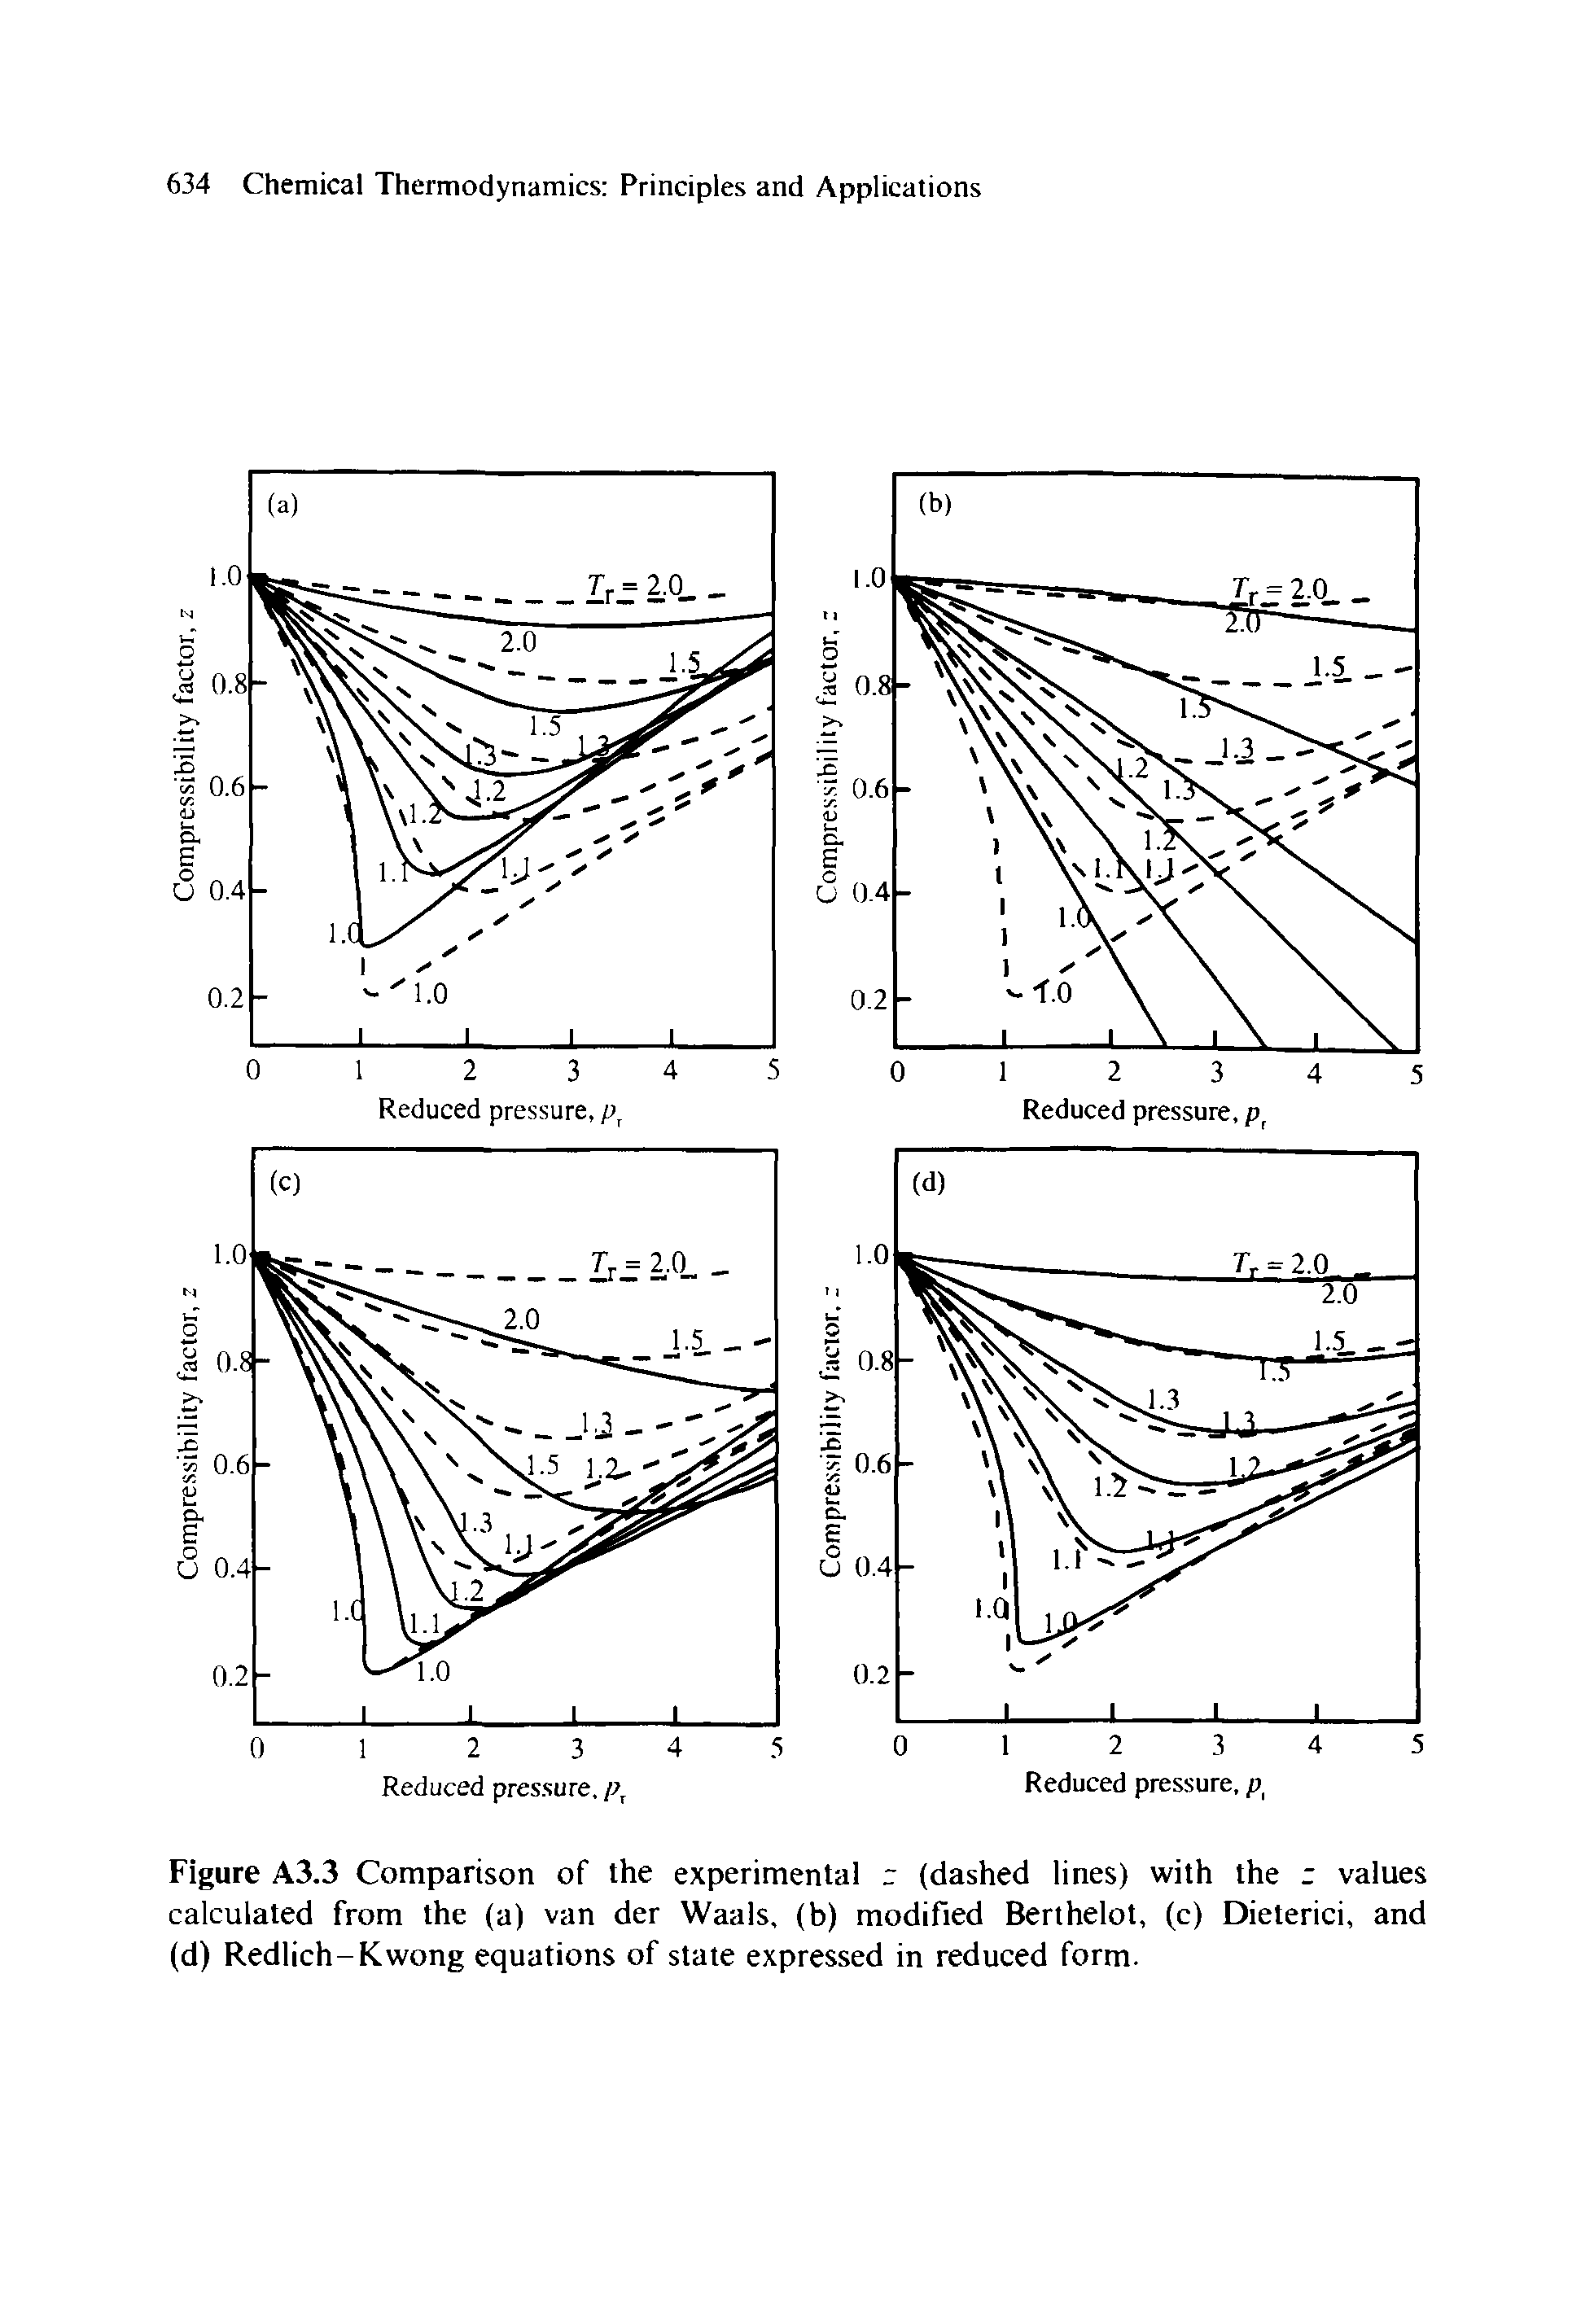 Figure A3.3 Comparison of the experimental r (dashed lines) with the c values calculated from the (a) van der Waals, (b) modified Berthelot, (c) Dieterici, and (d) Redlich-Kwong equations of state expressed in reduced form.